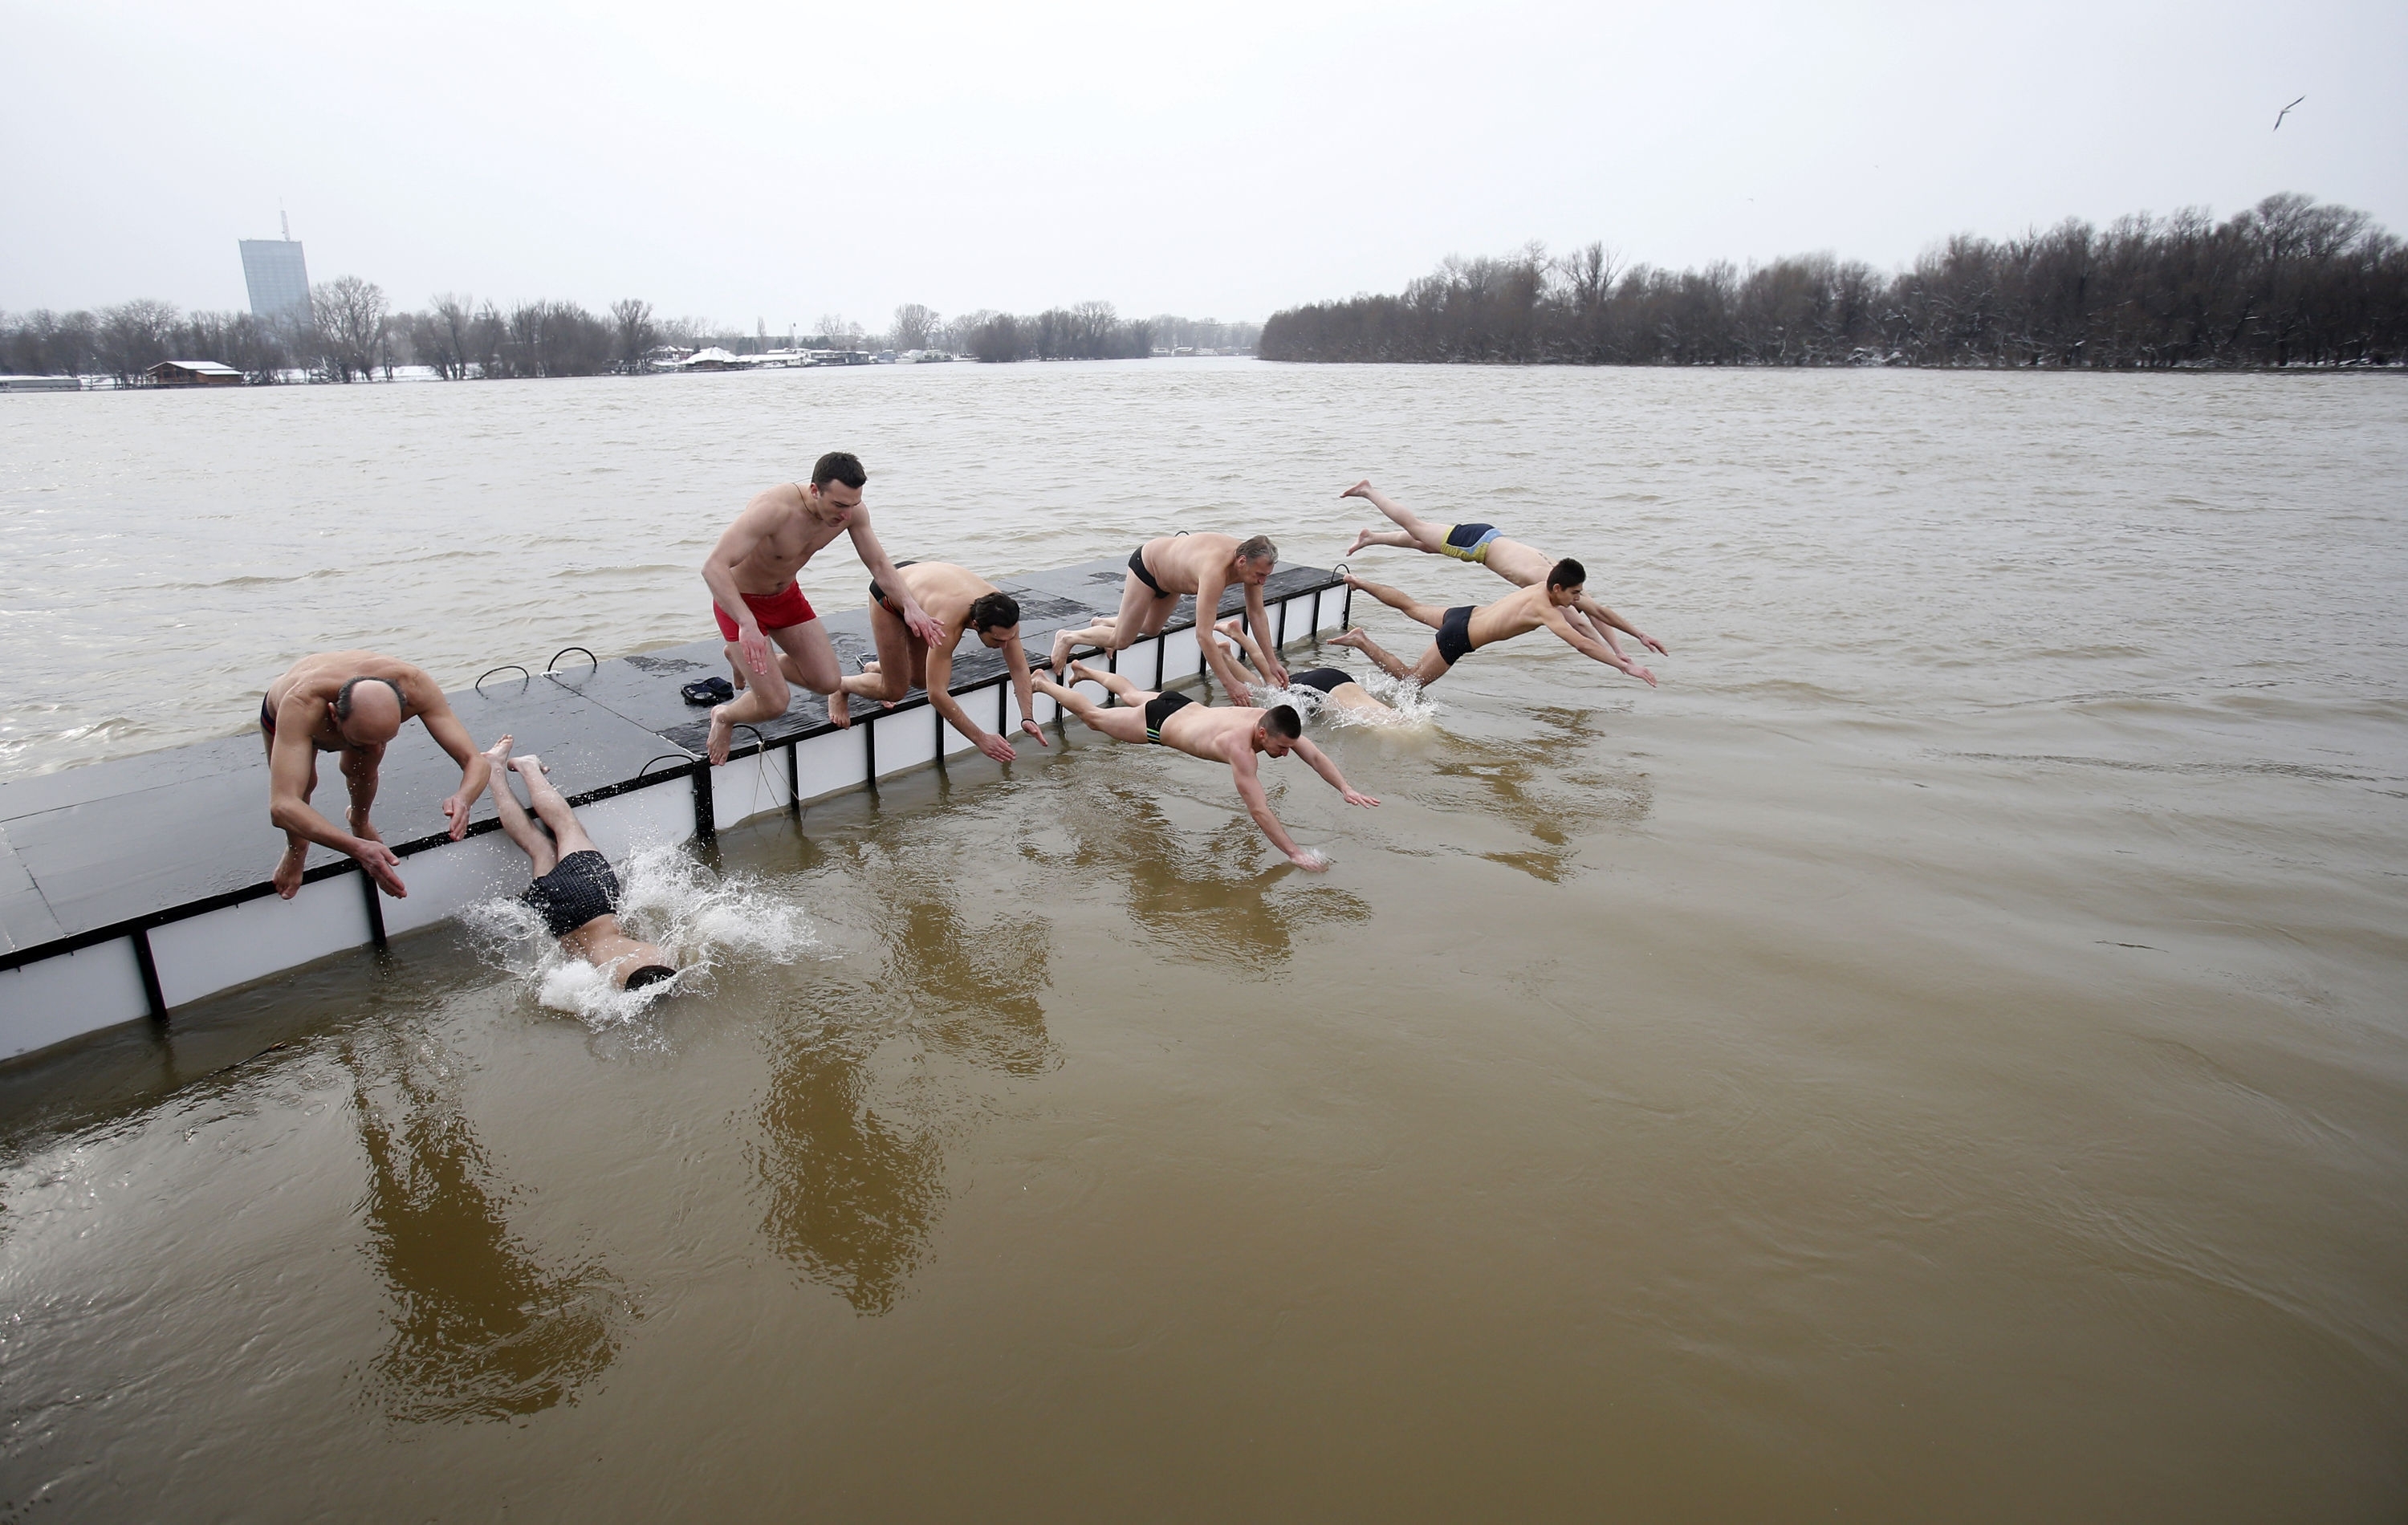 Orthodox believers jump in the icy water of the Sava river in Belgrade, Serbia, Monday, Jan. 18, 2016. Serbian Orthodox Church followers plunged into icy rivers and ponds across the country to mark the upcoming Epiphany, cleansing themselves with water deemed holy for the day. Water that is blessed by a cleric on Epiphany is considered holy and pure until next year's celebration, and is believed to have special powers of protection and healing. (AP Photo/Darko Vojinovic)